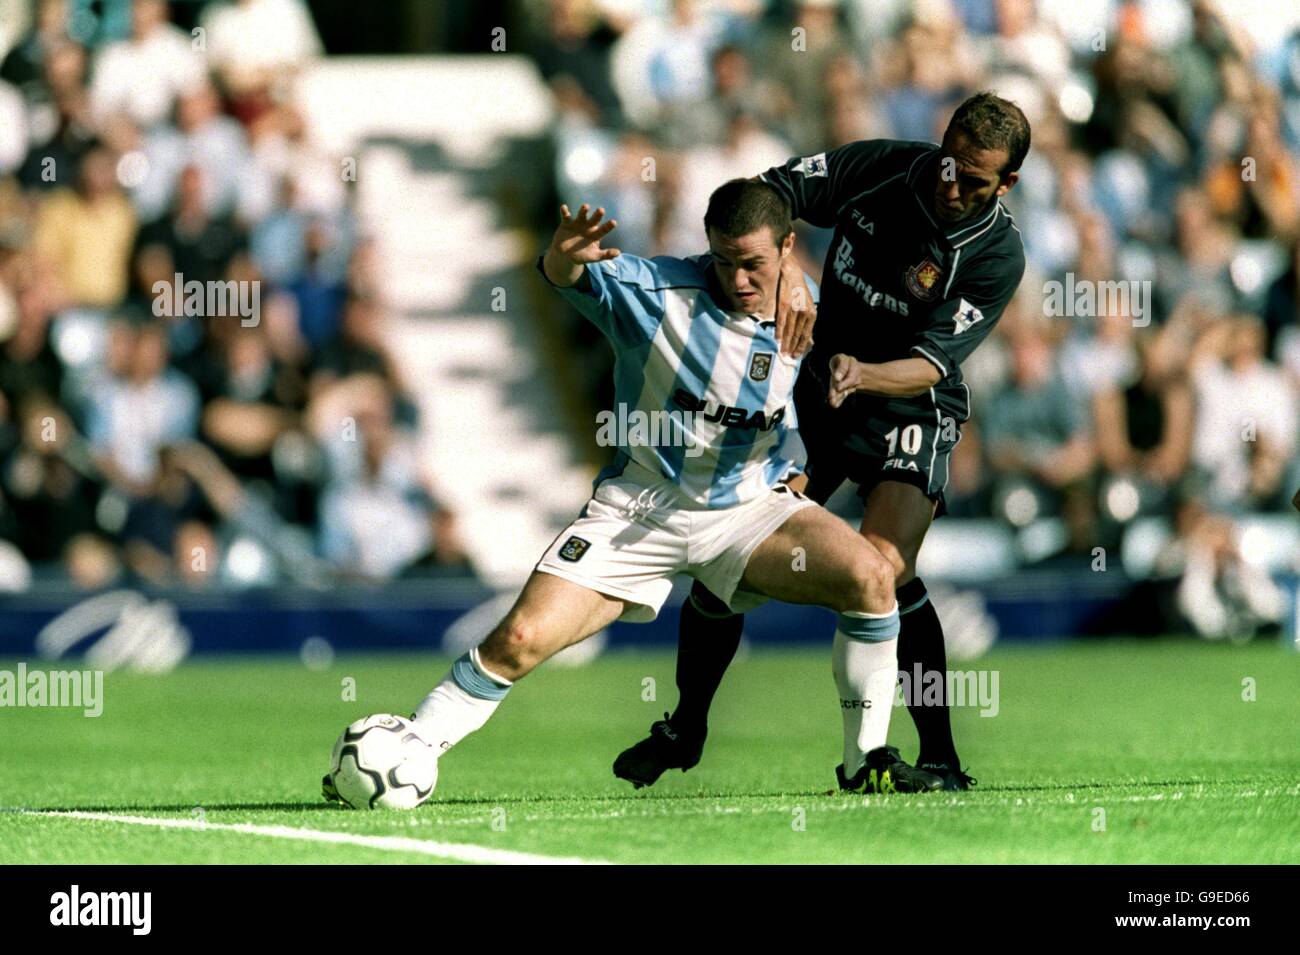 Soccer - FA Carling Premiership - Coventry City v West Ham United. Coventry City's David Thompson (l) tussles with West Ham United's Paolo Di Canio (r) Stock Photo